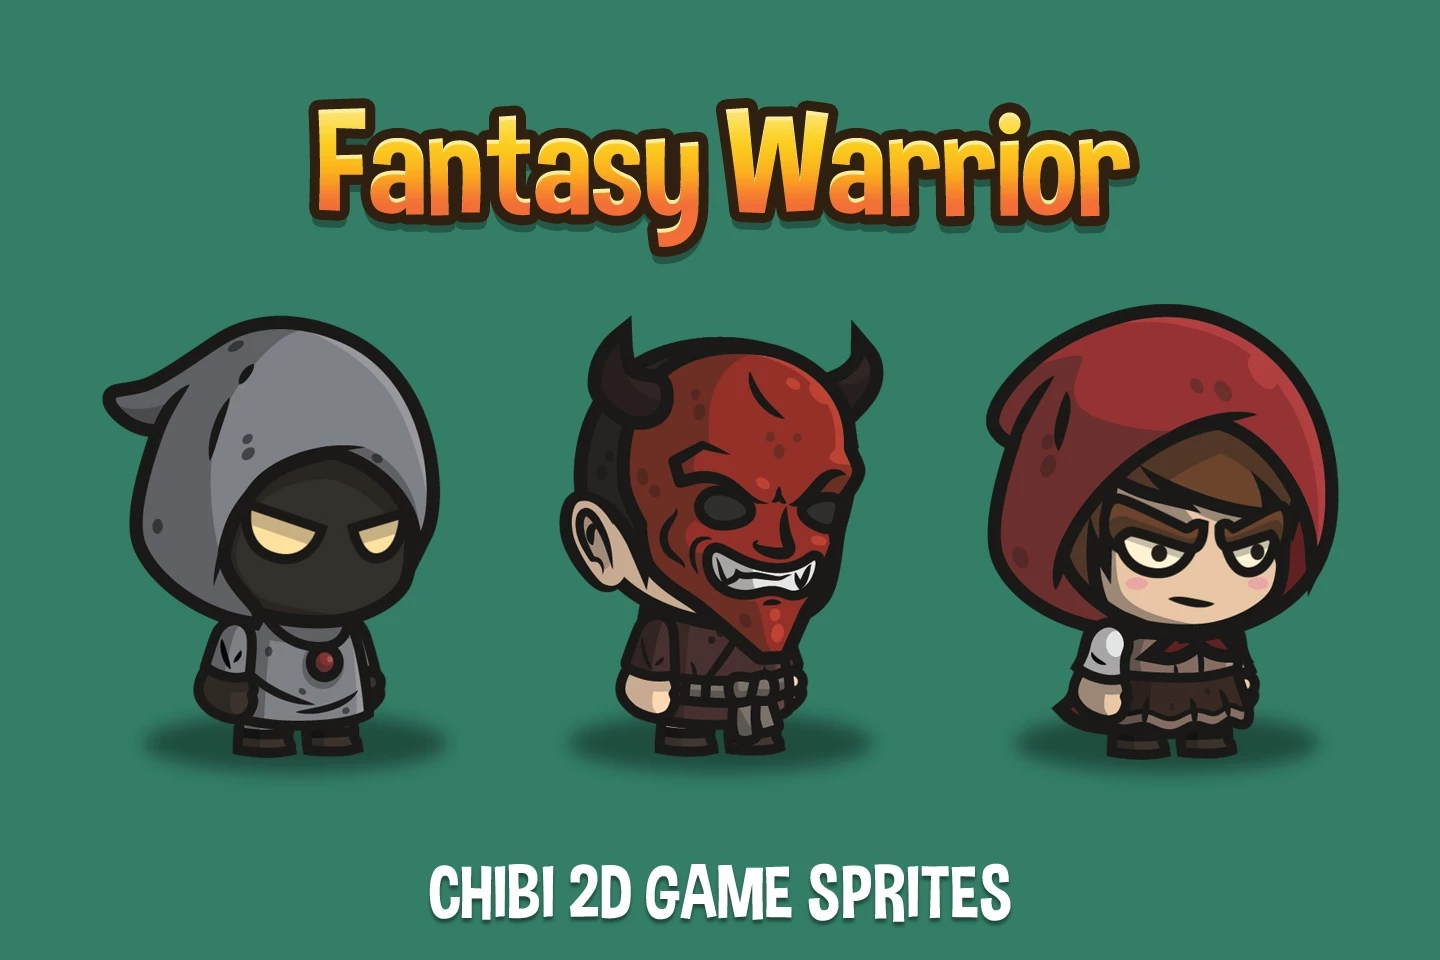 Chibi warriors first look gameplay (Browser game) 